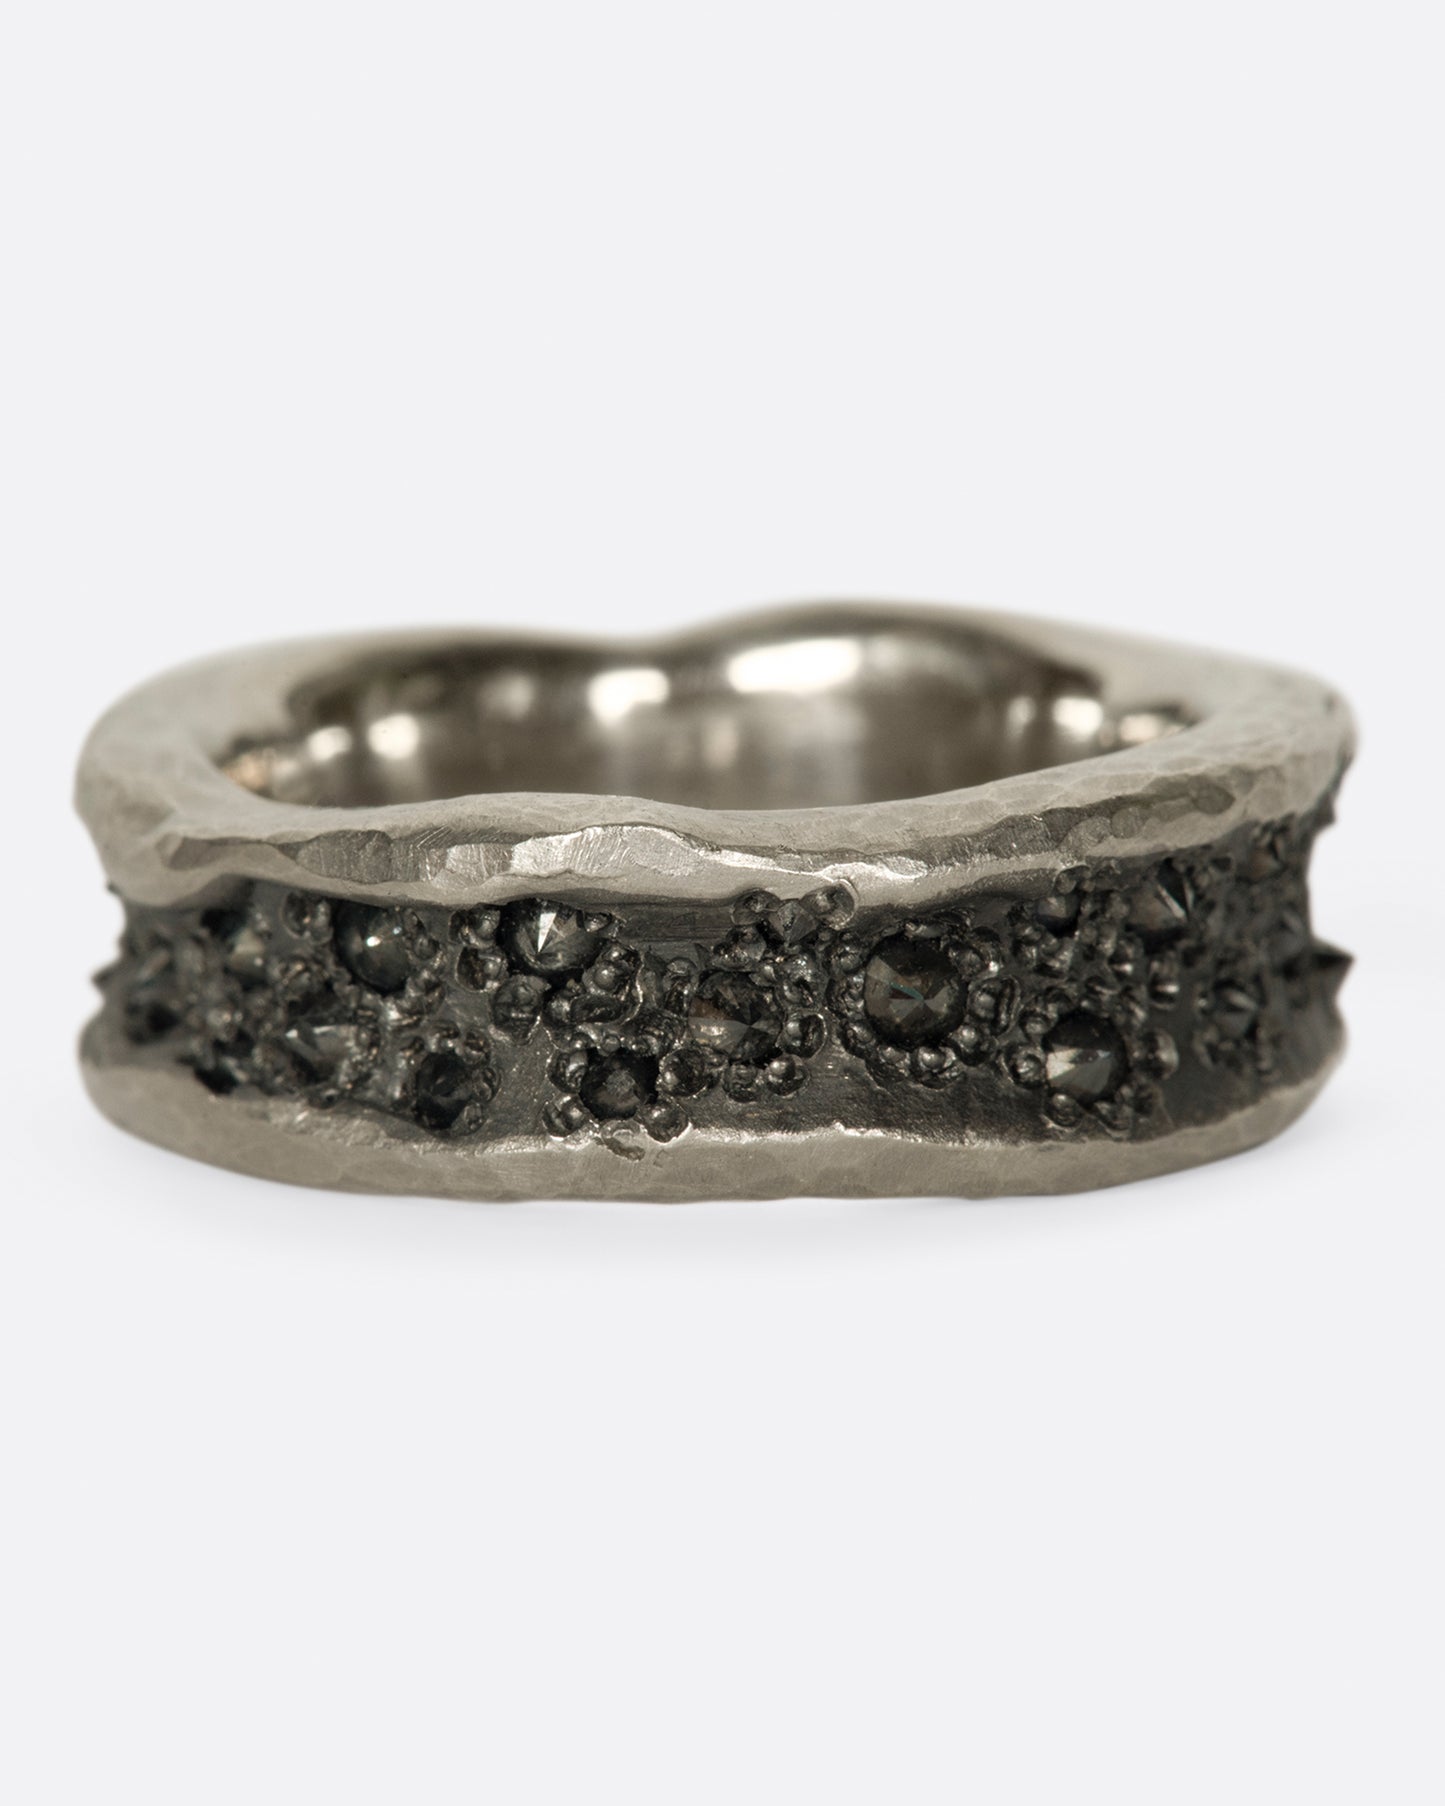 A concave, hammered palladium band with inverted black diamonds throughout its center.